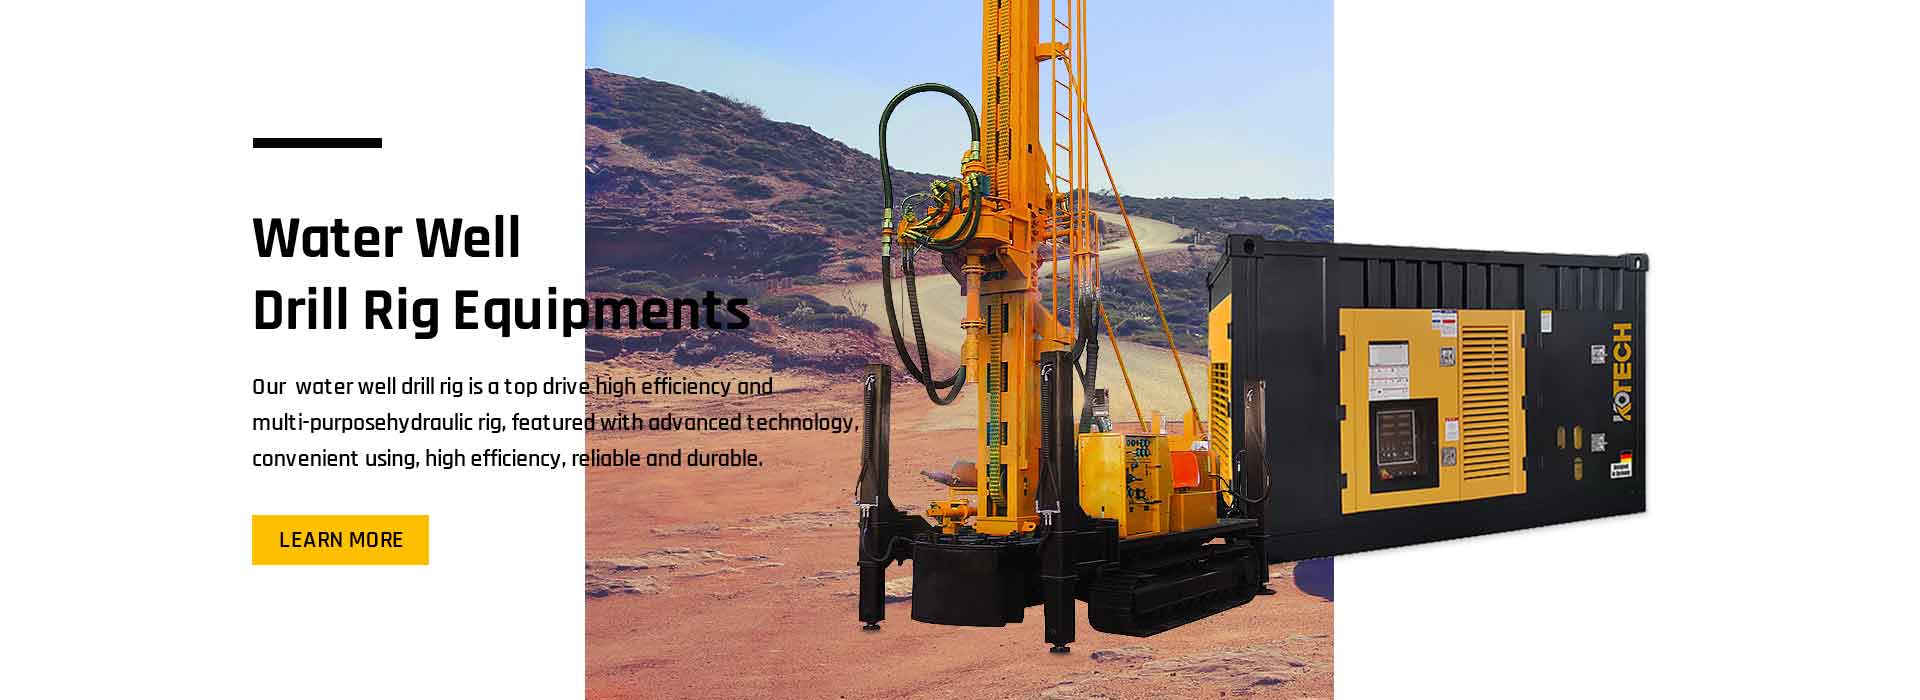 Water Well Drill Rig Equipments